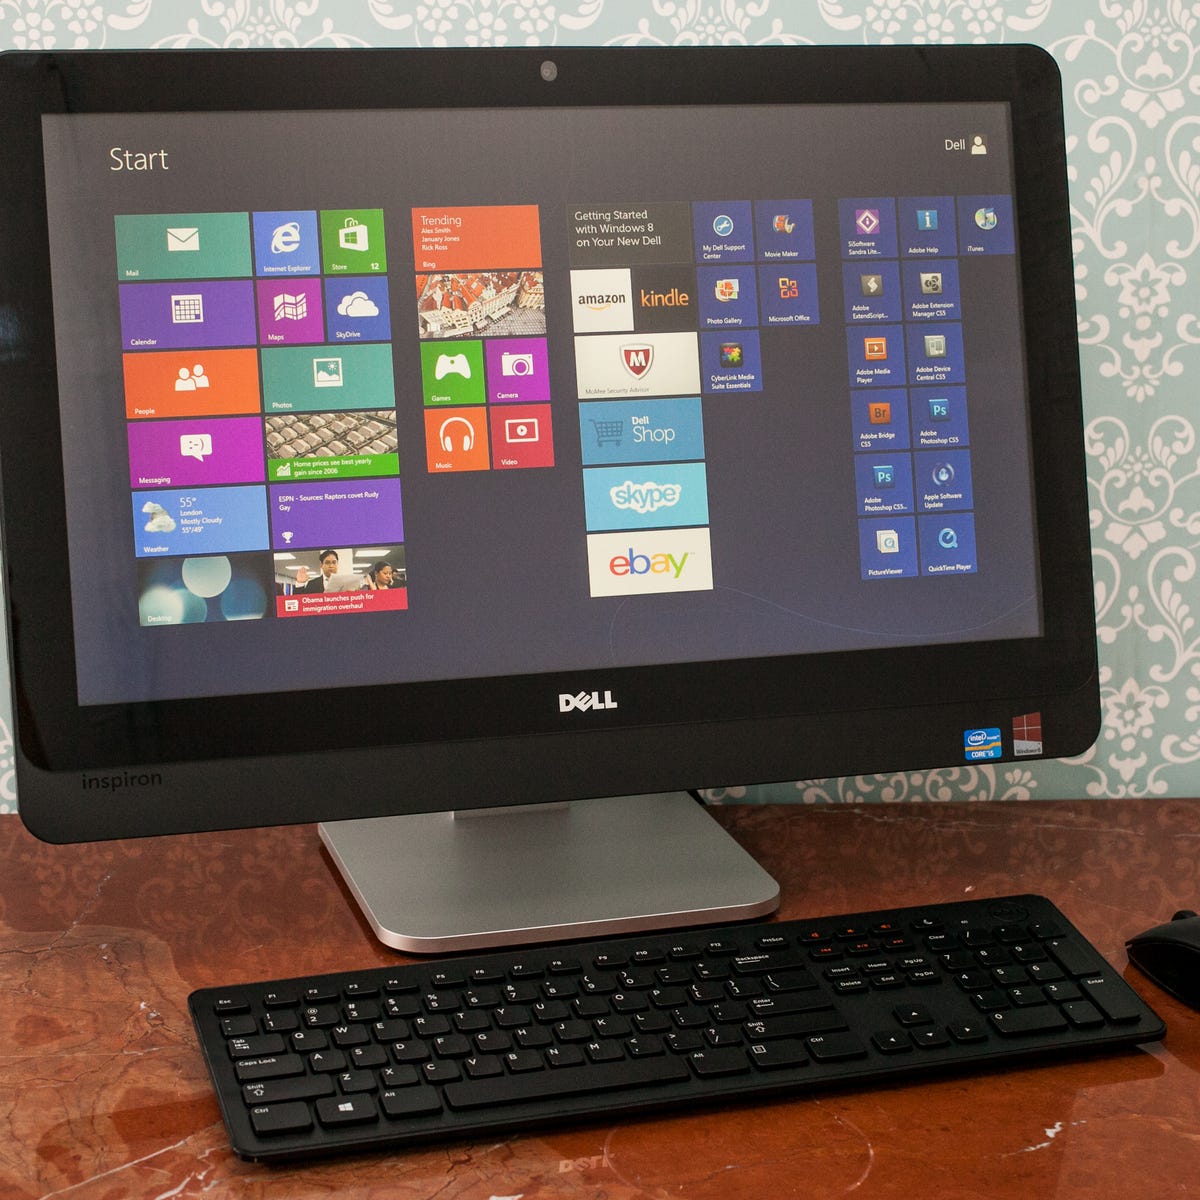 Dell Inspiron One 2330 review: Dell's steady, mostly predictable all-in-one  - CNET